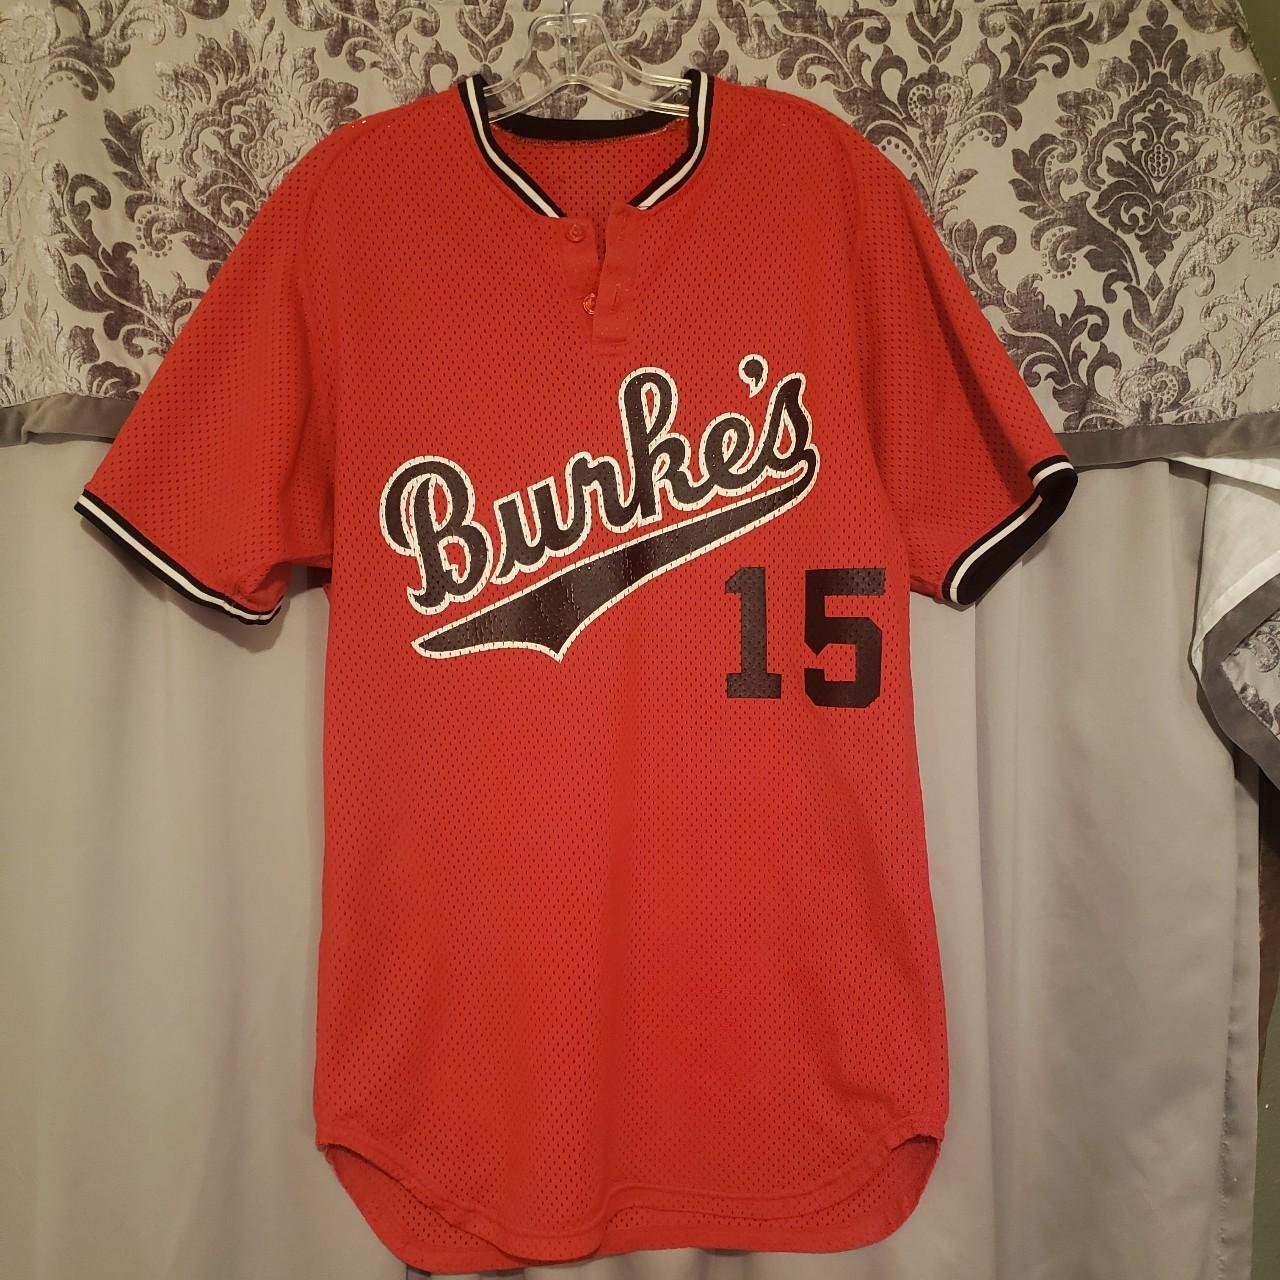 Rare baseball jersey authentic it is polyester - Depop